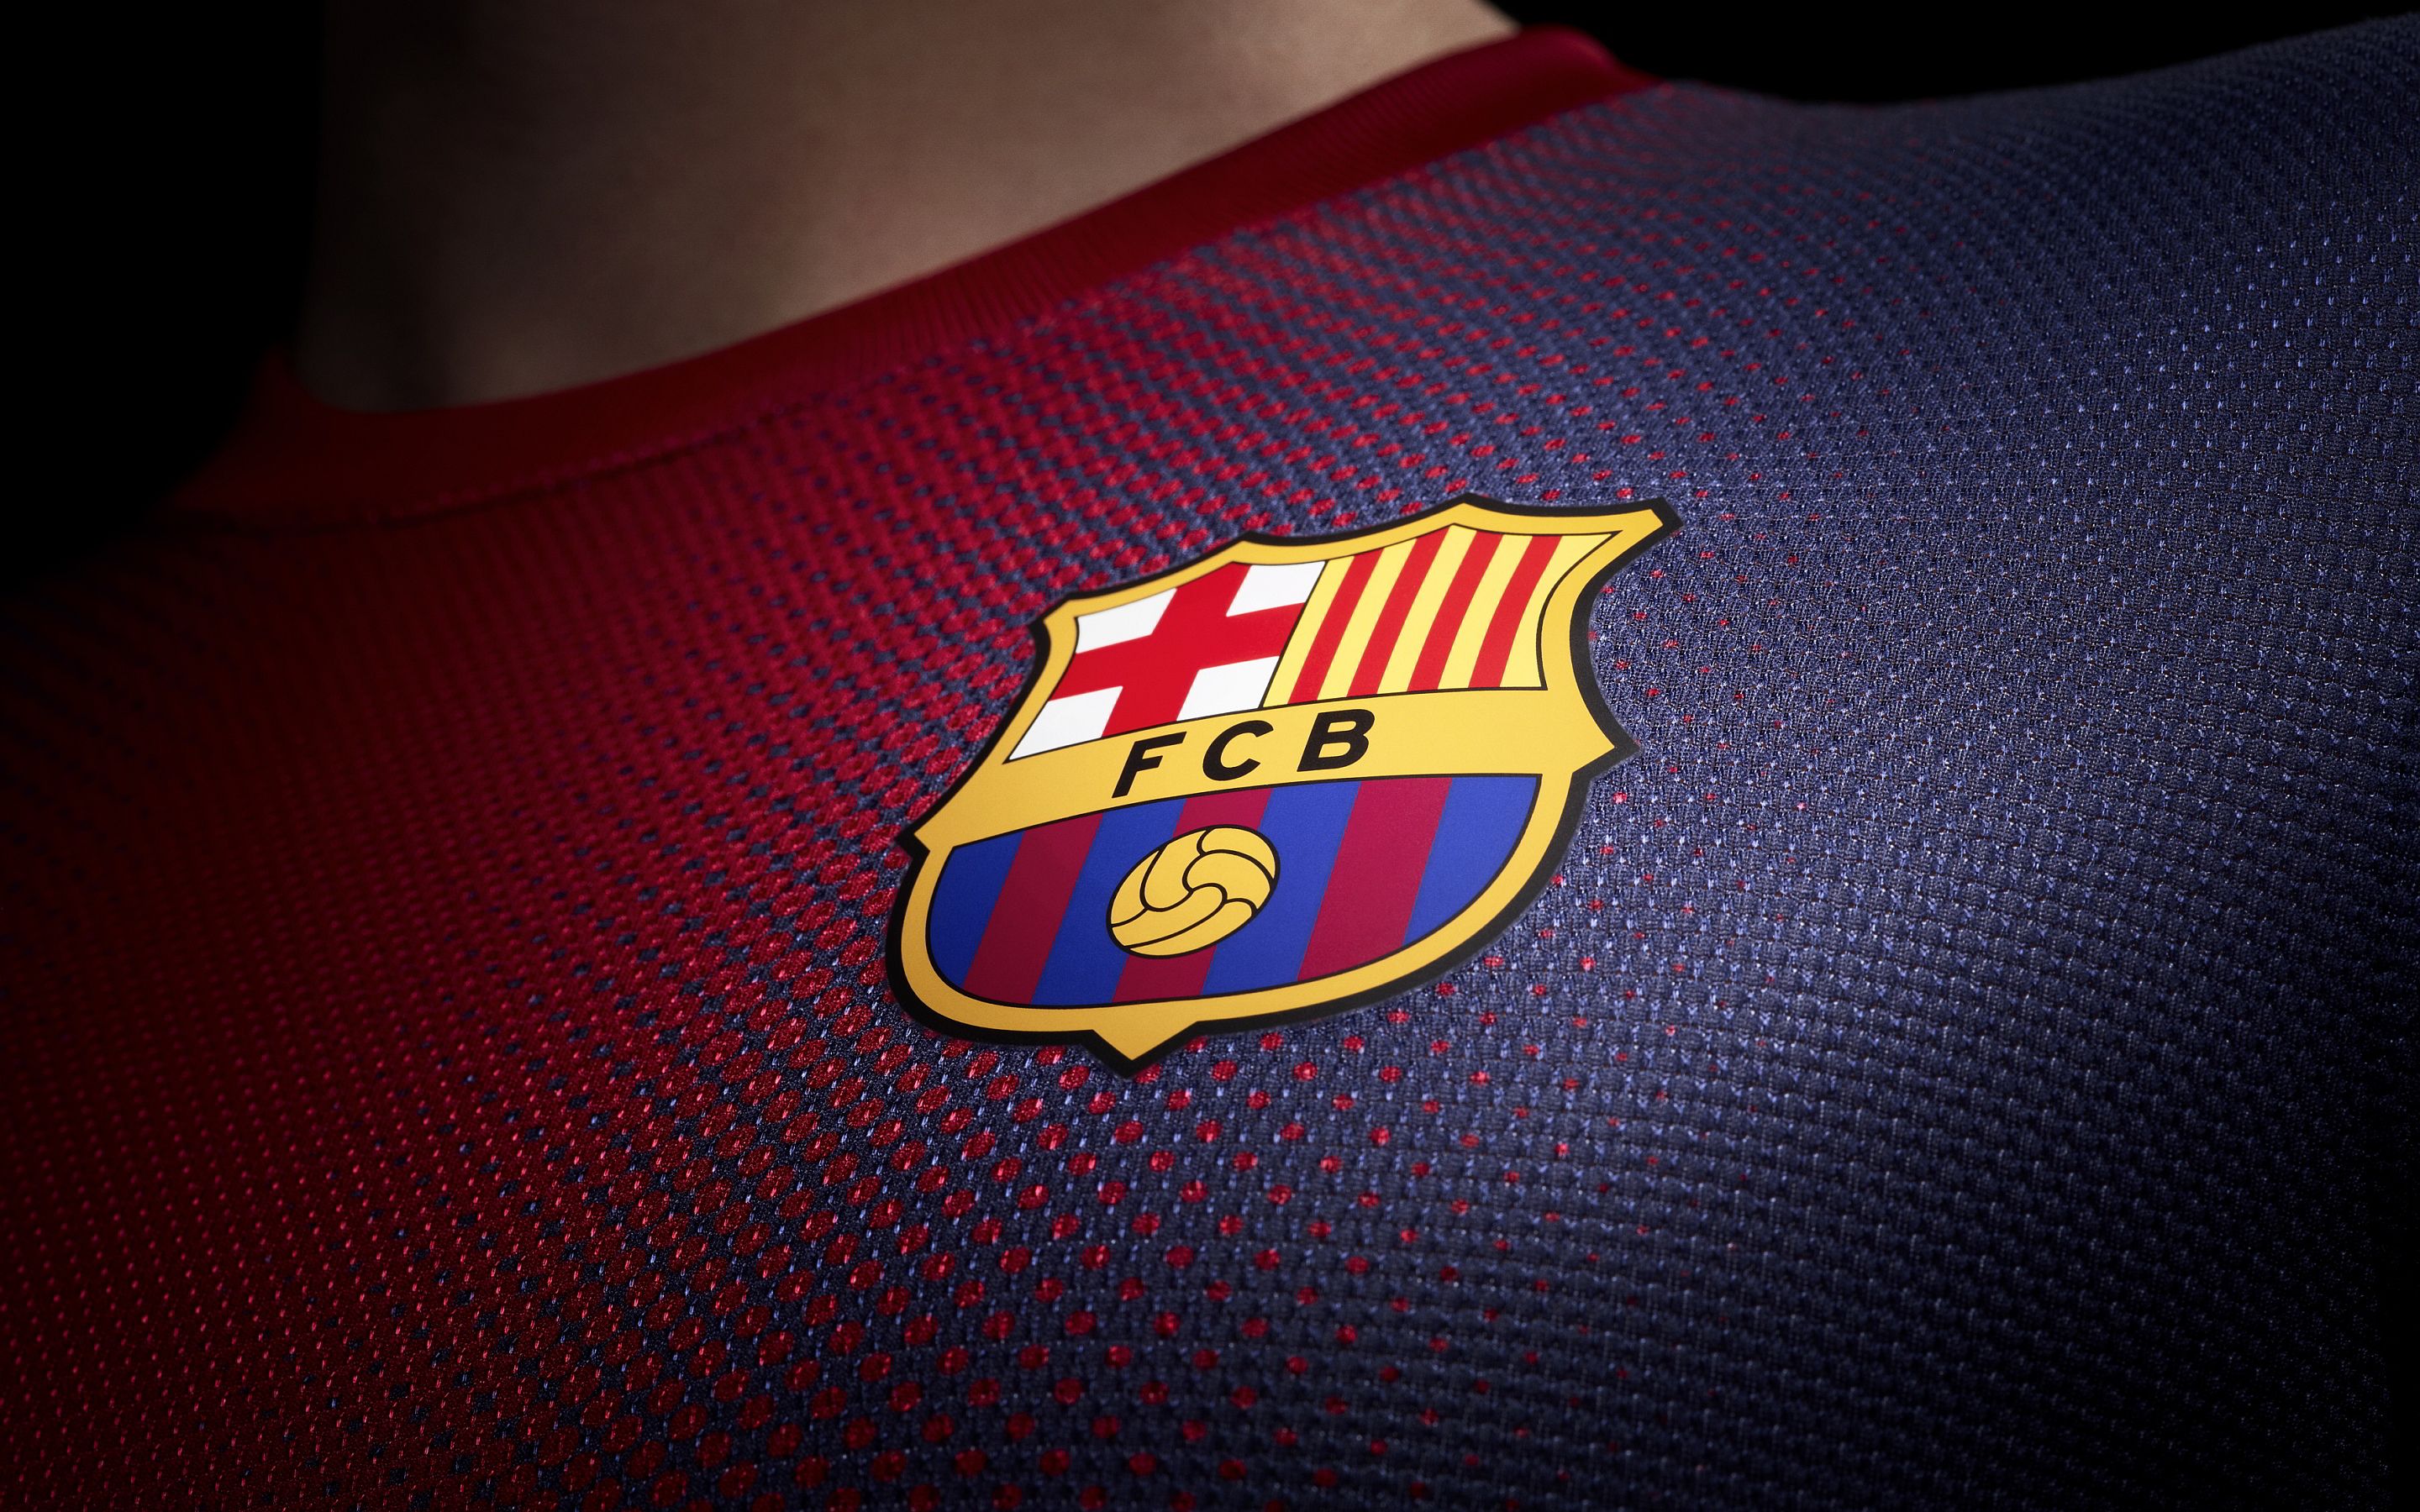 Fc barcelona logo Wallpapers Pictures